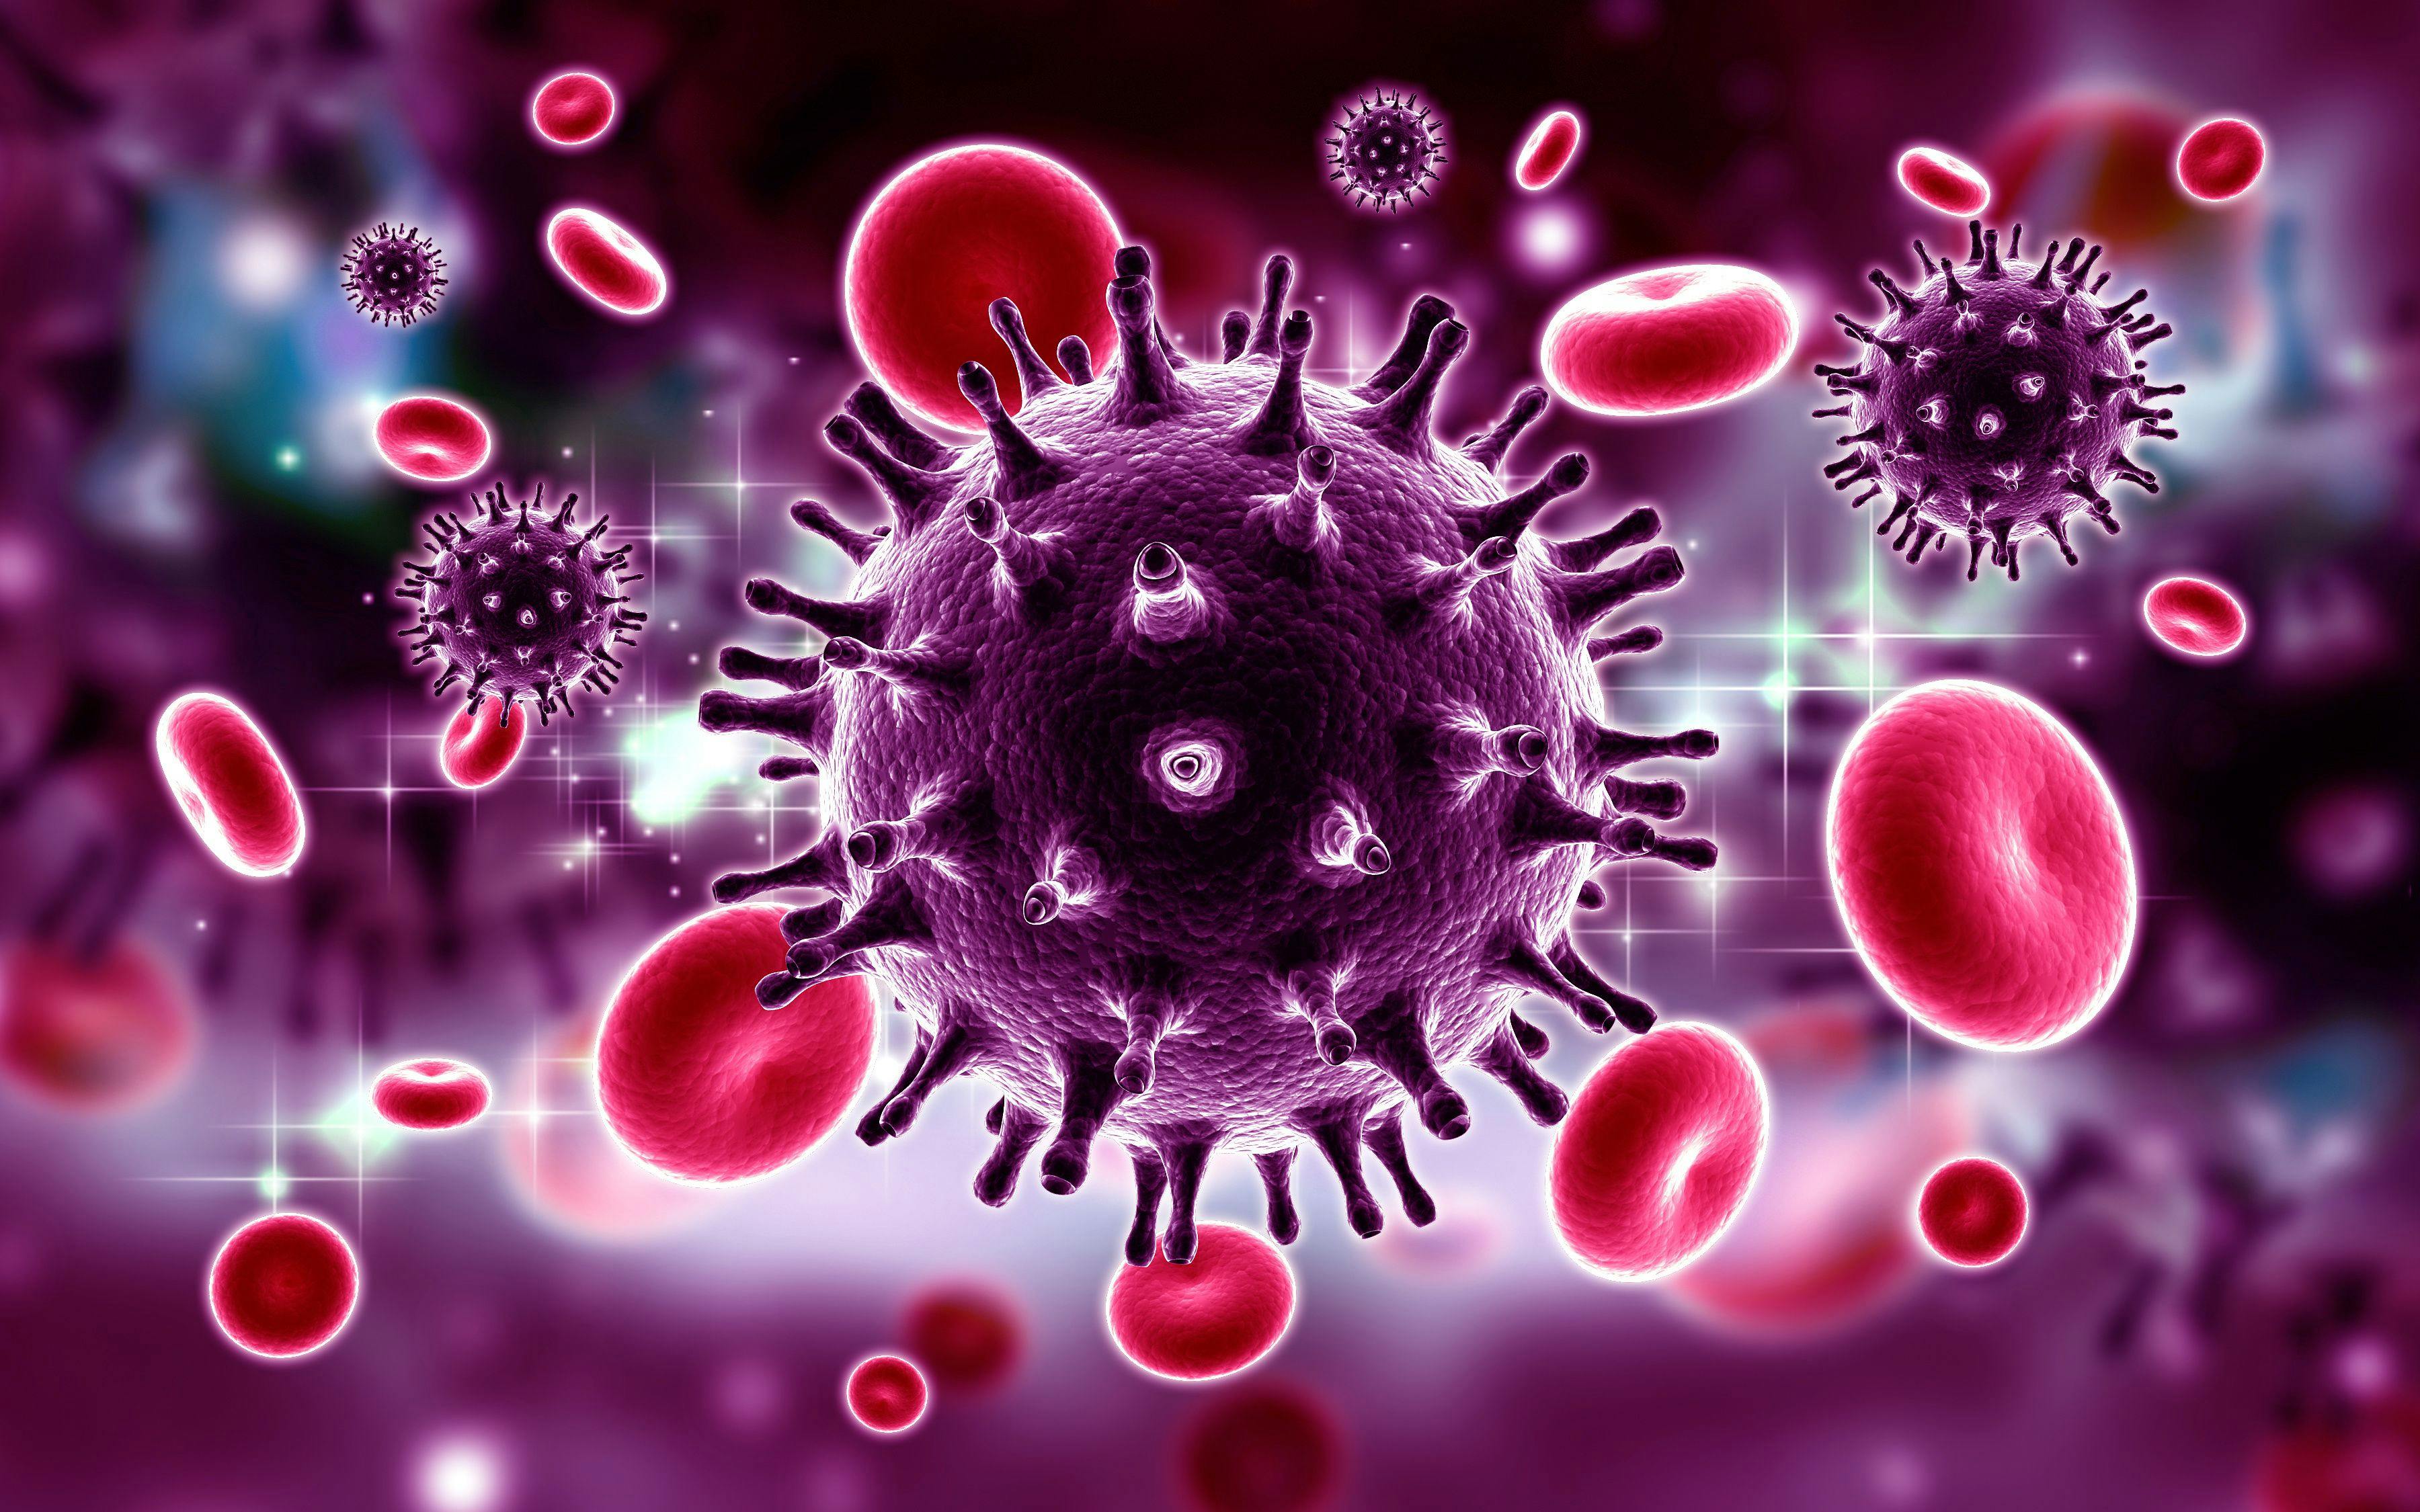 Study: COVID-19 Pandemic Leads to Decrease in HIV-Related Services in India